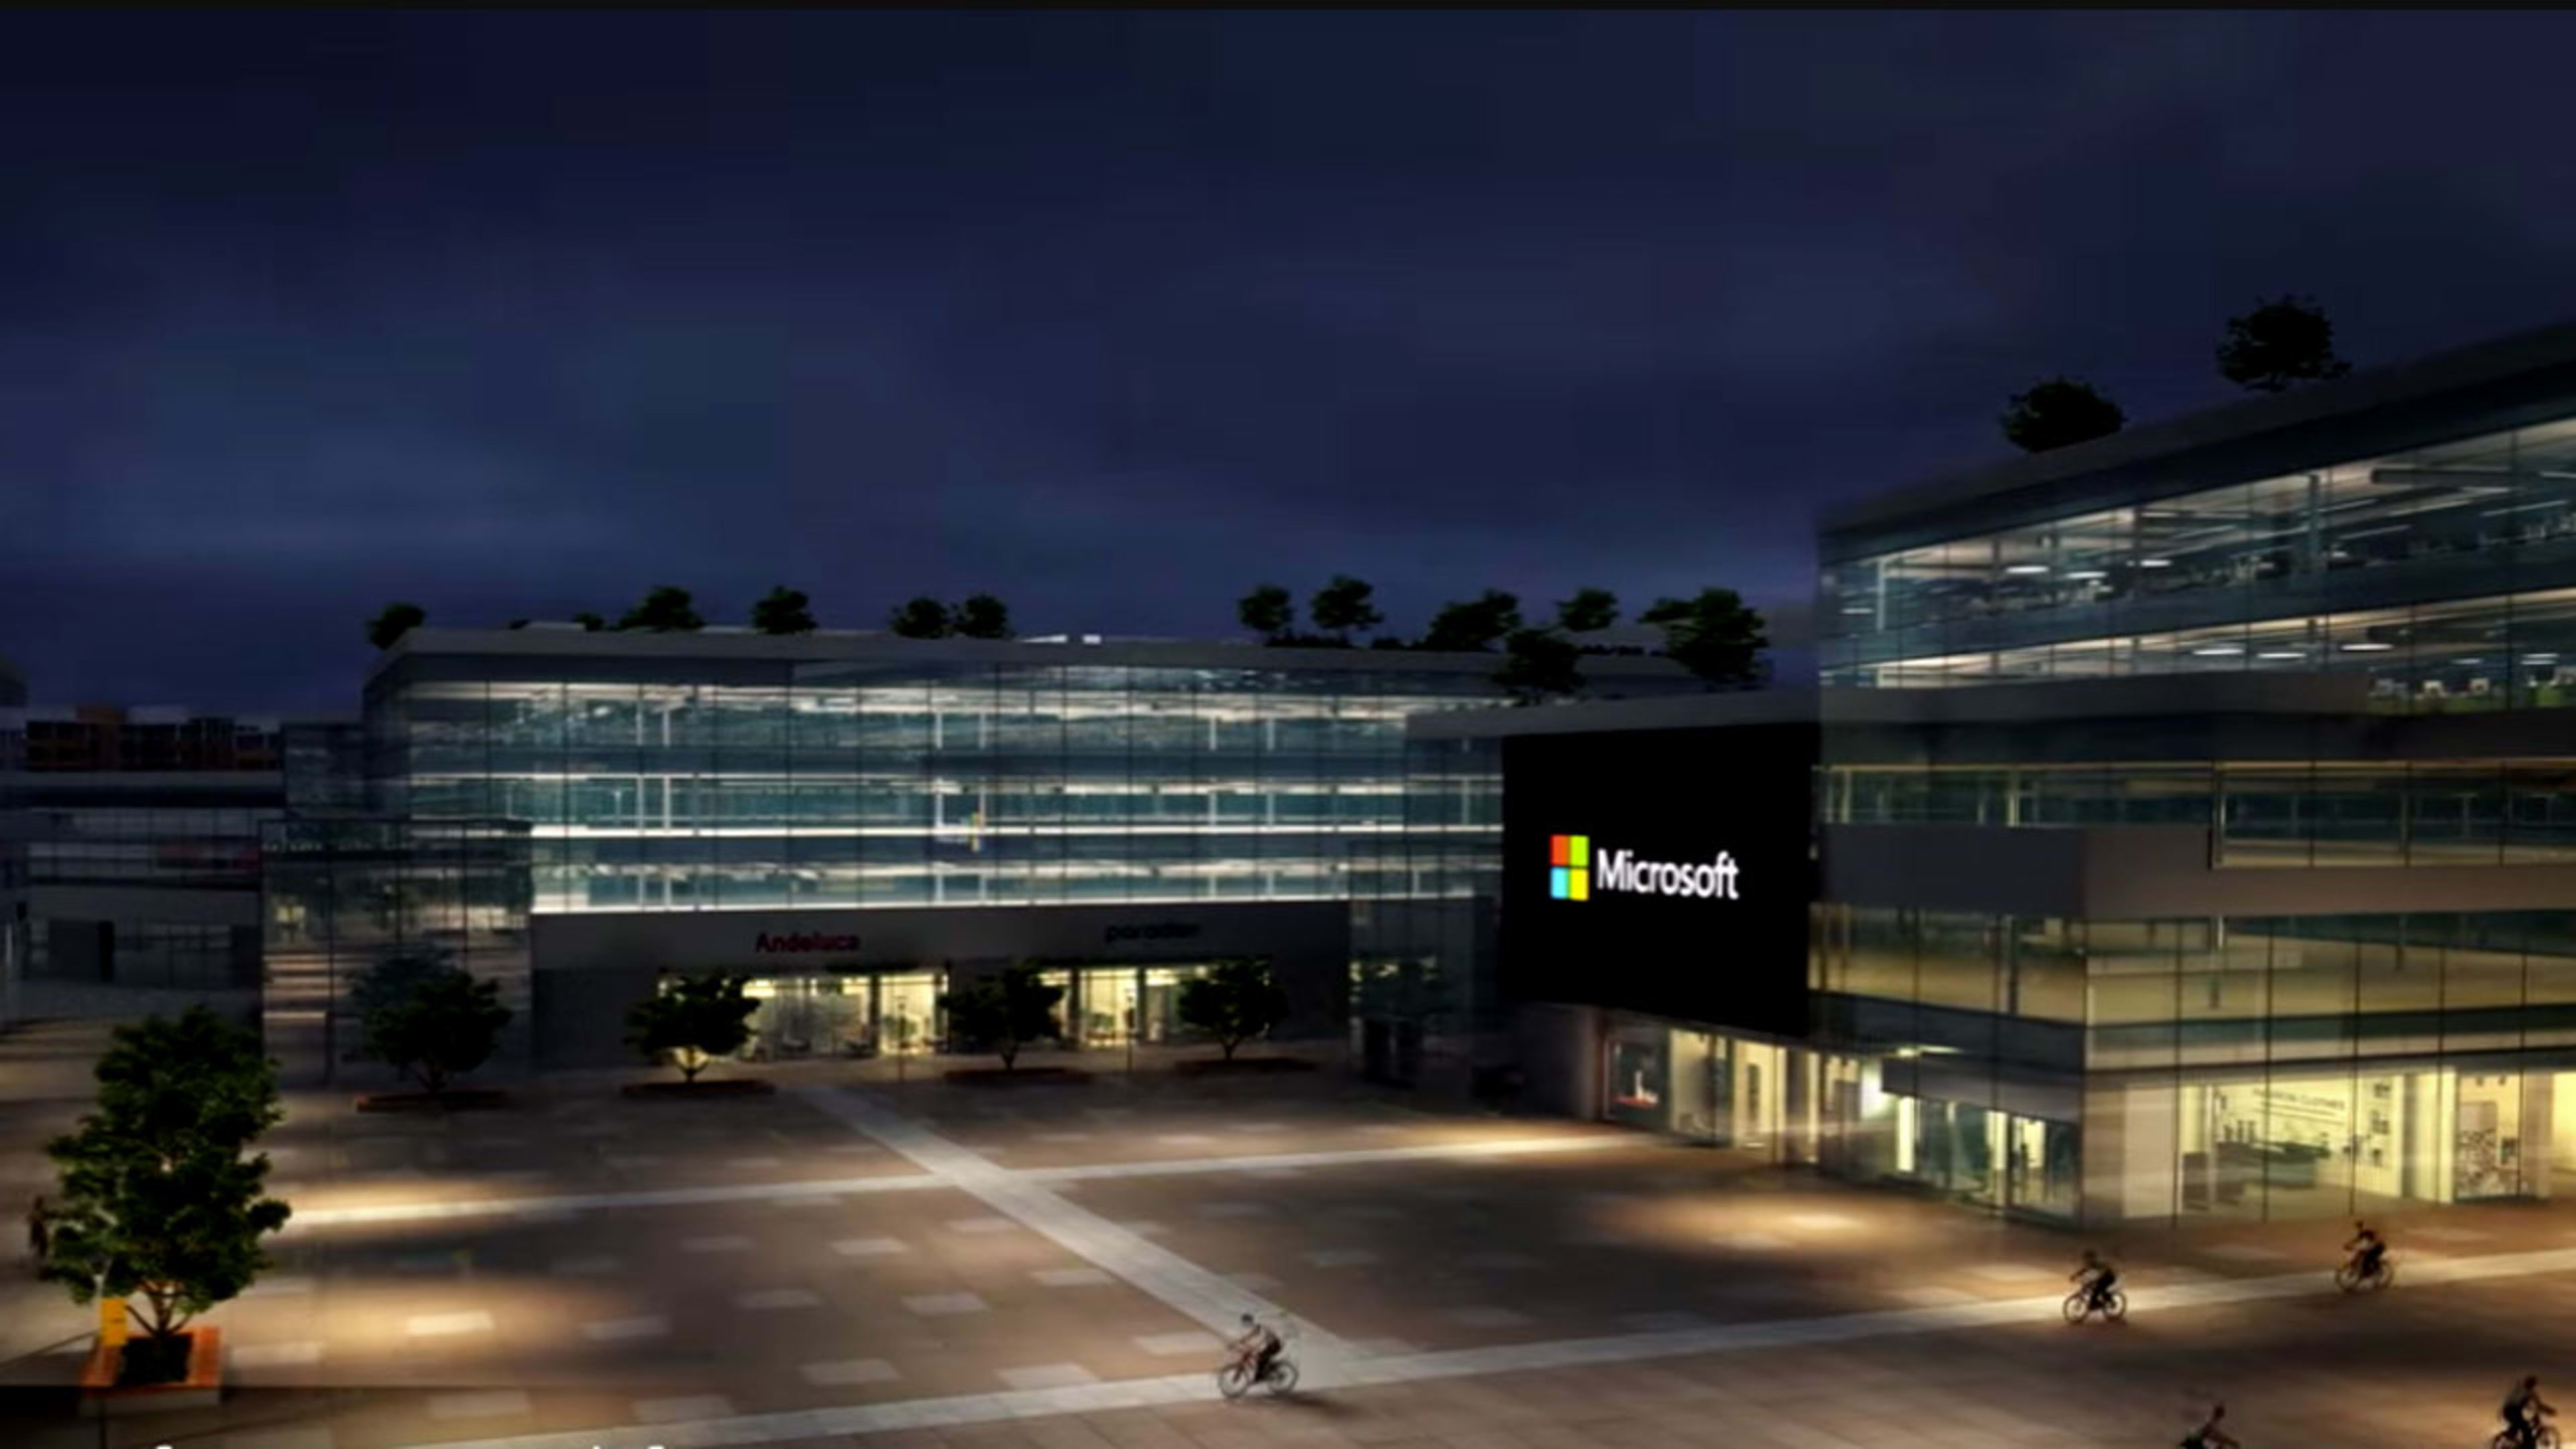 Apple’s Spaceship better look out: Microsoft is modernizing its HQ, too